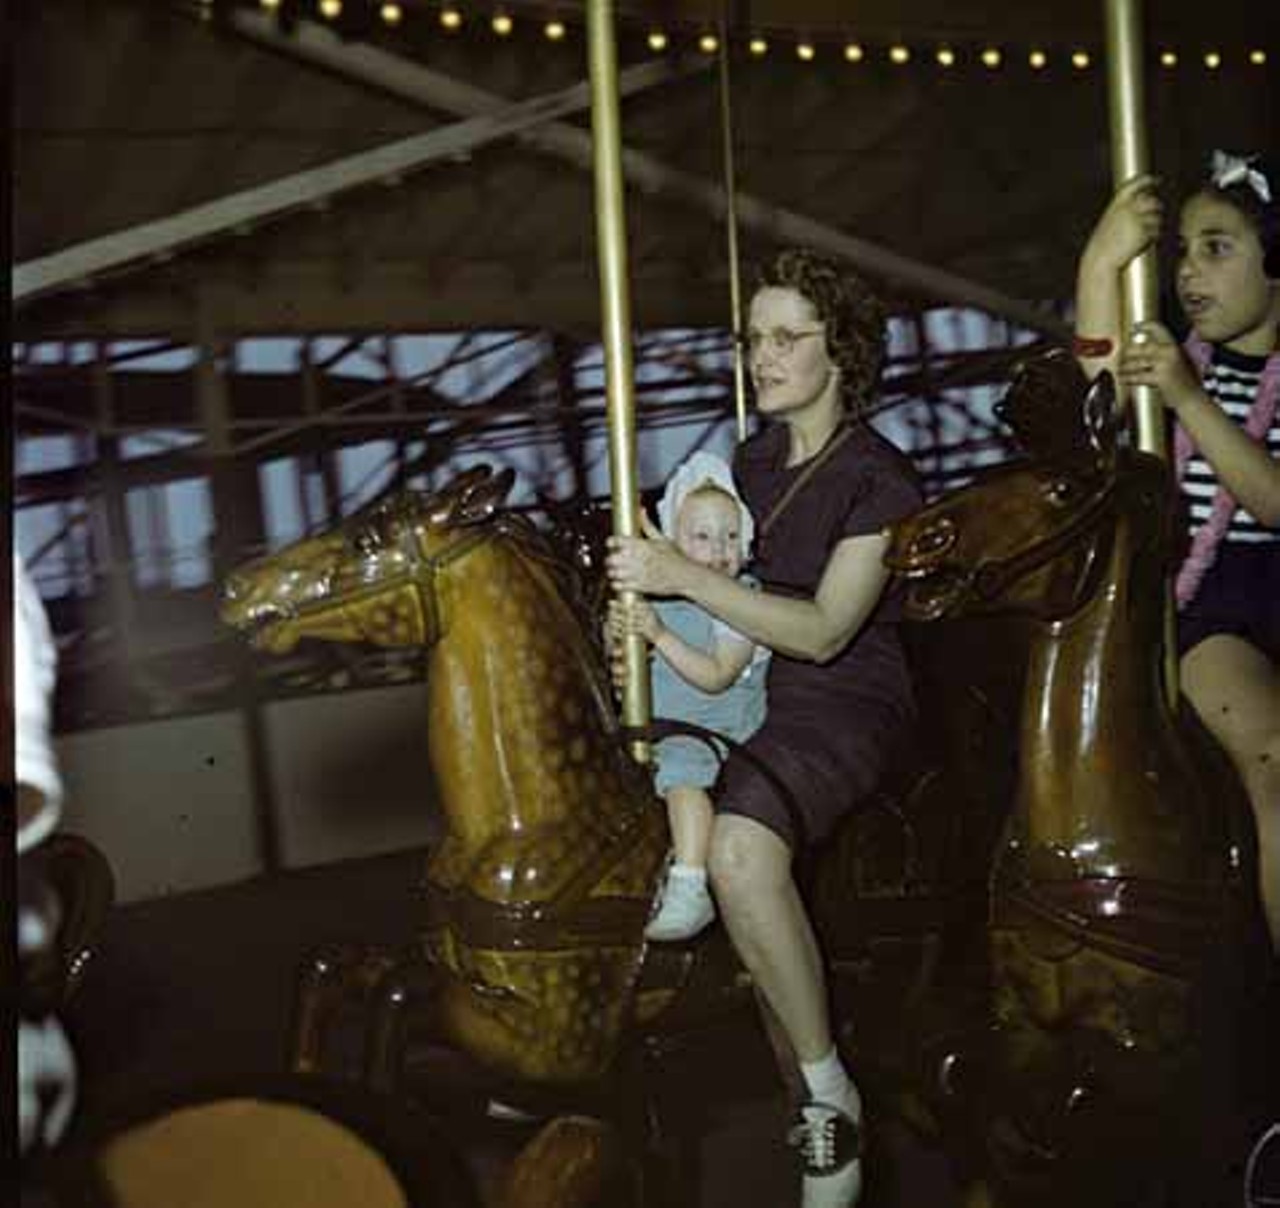 1947. The carousel was installed in 1929 and remained in tact after the fire.